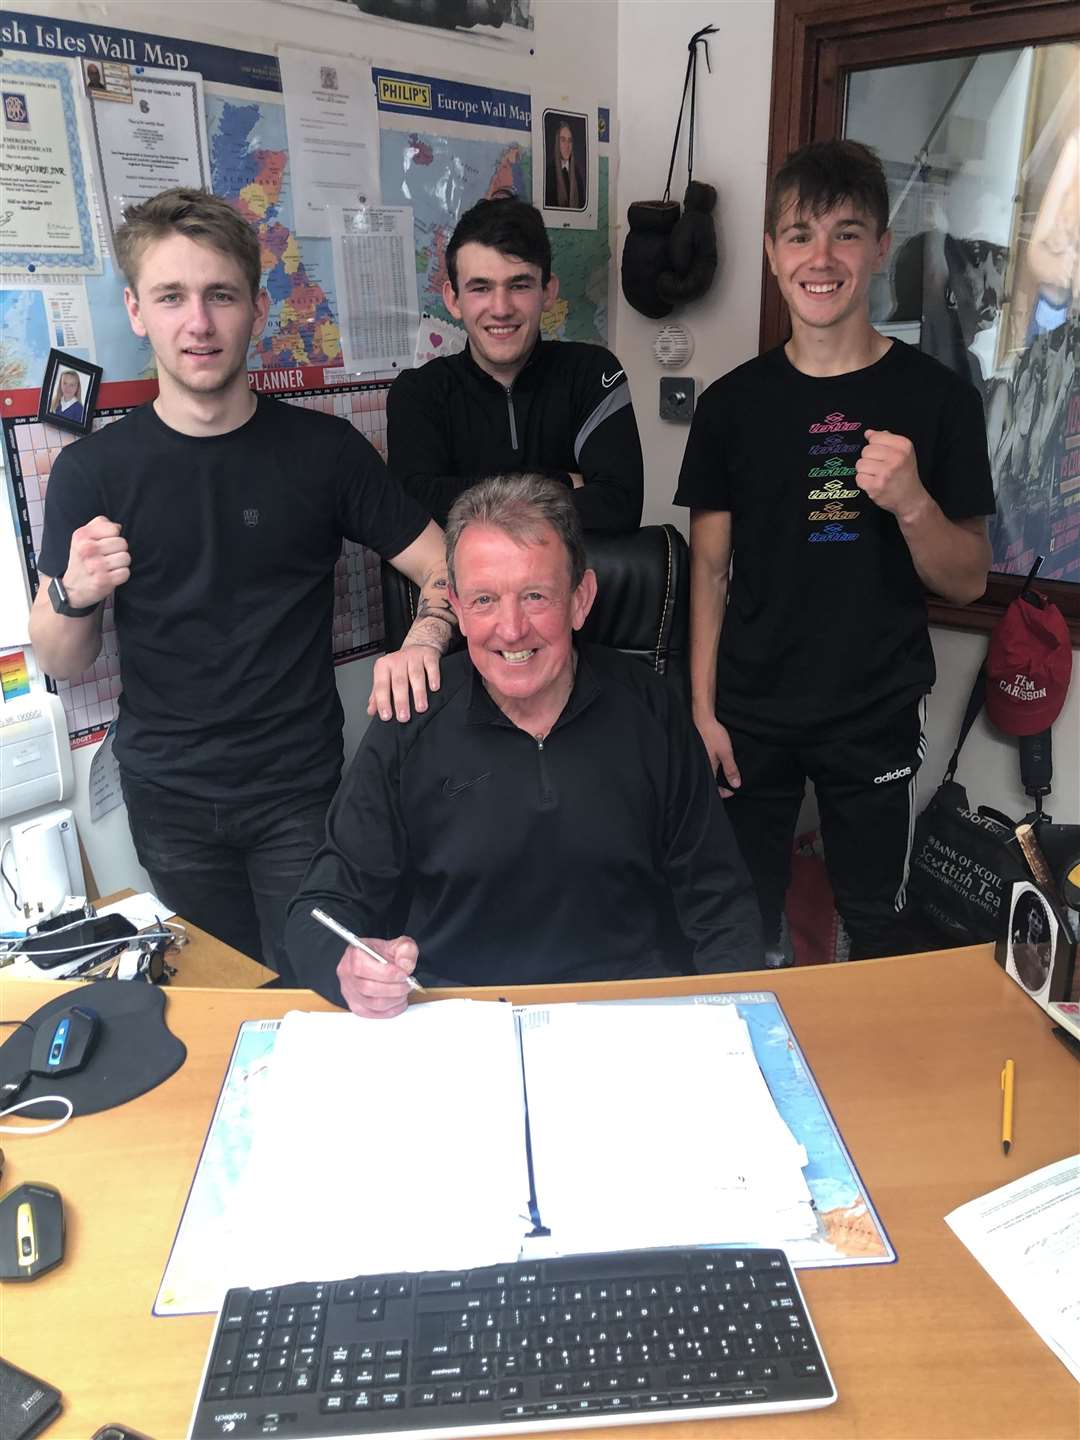 George Stewart, Callum Turnbull and Adian Williamson are turning pro under the guidance of Inverness City Boxing Club head coach Laurie Redfern.